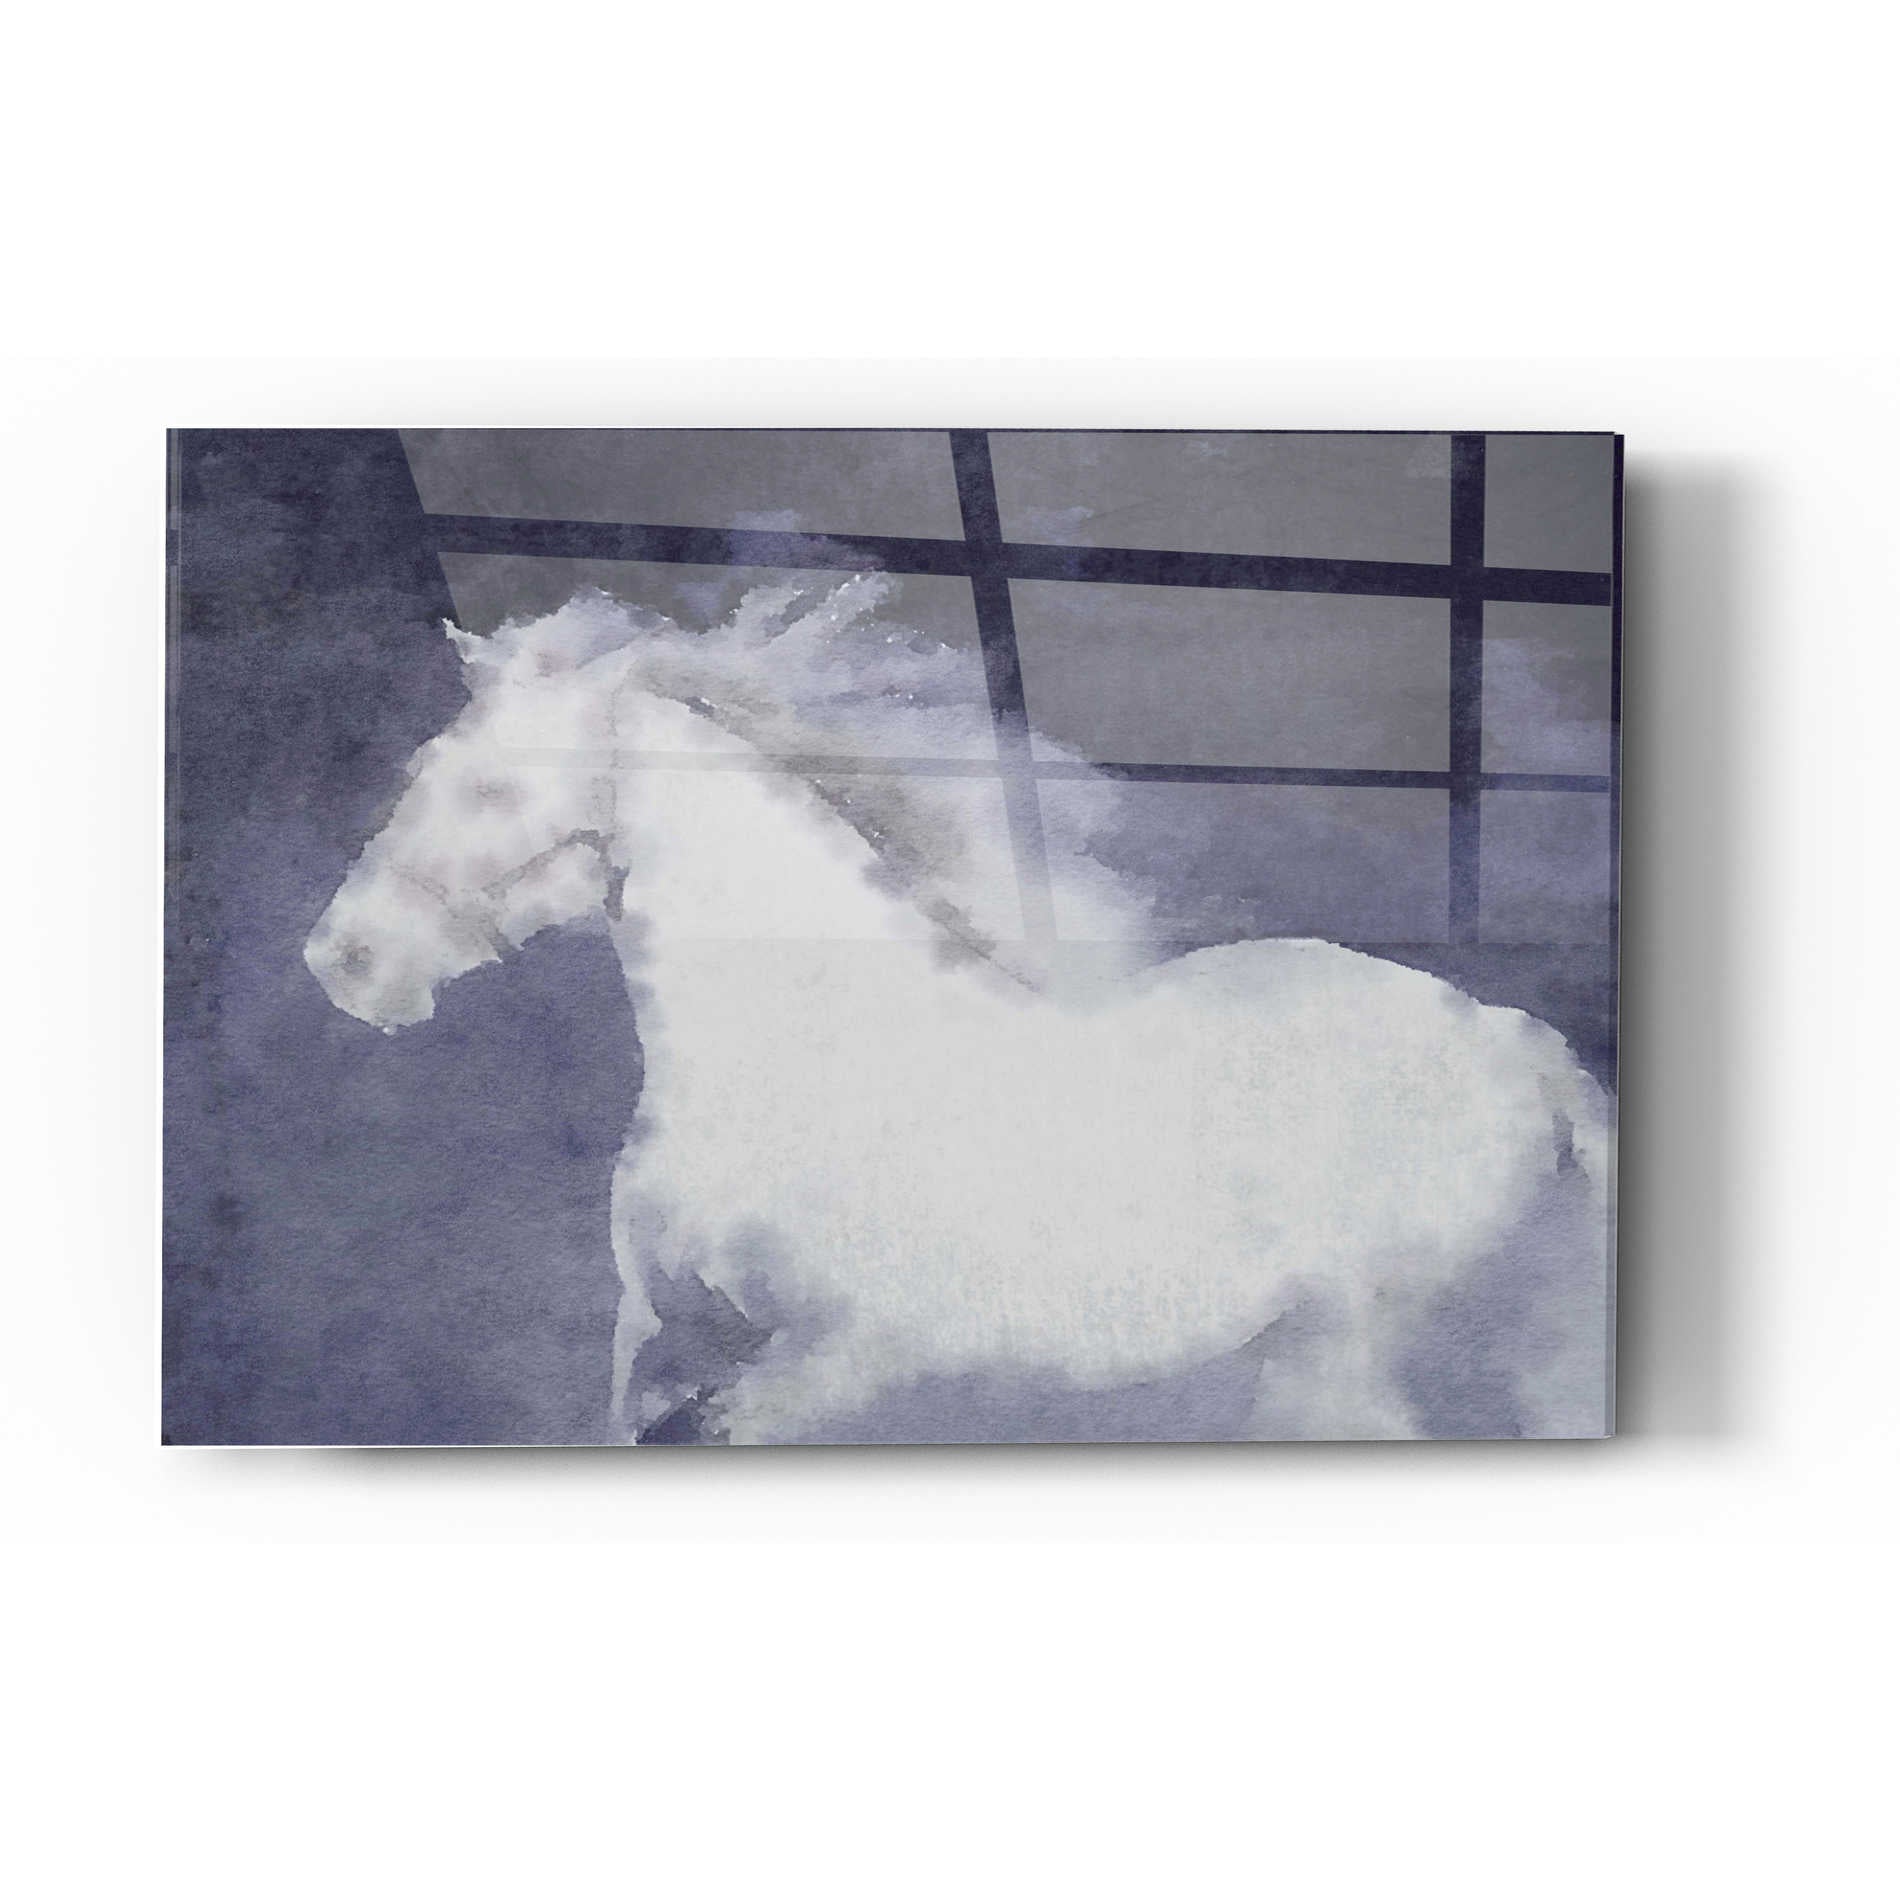 Epic Art 'White Running Horse In The Fog Mist 1' by Irena Orlov, Acrylic Glass Wall Art,12x16